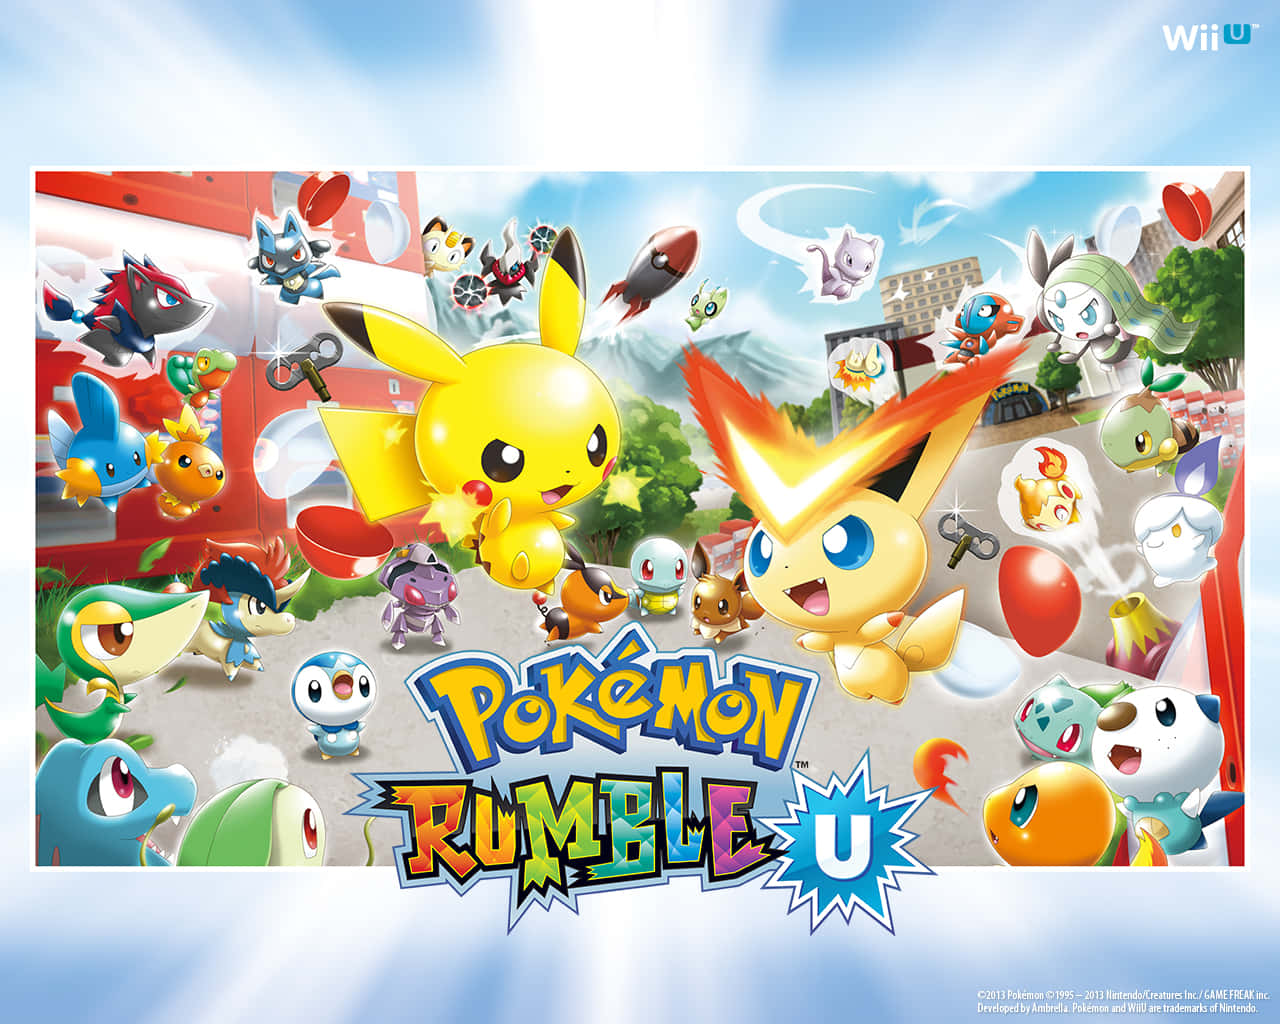 Explore the world of Pokemon Rumble with all your favorite characters. Wallpaper